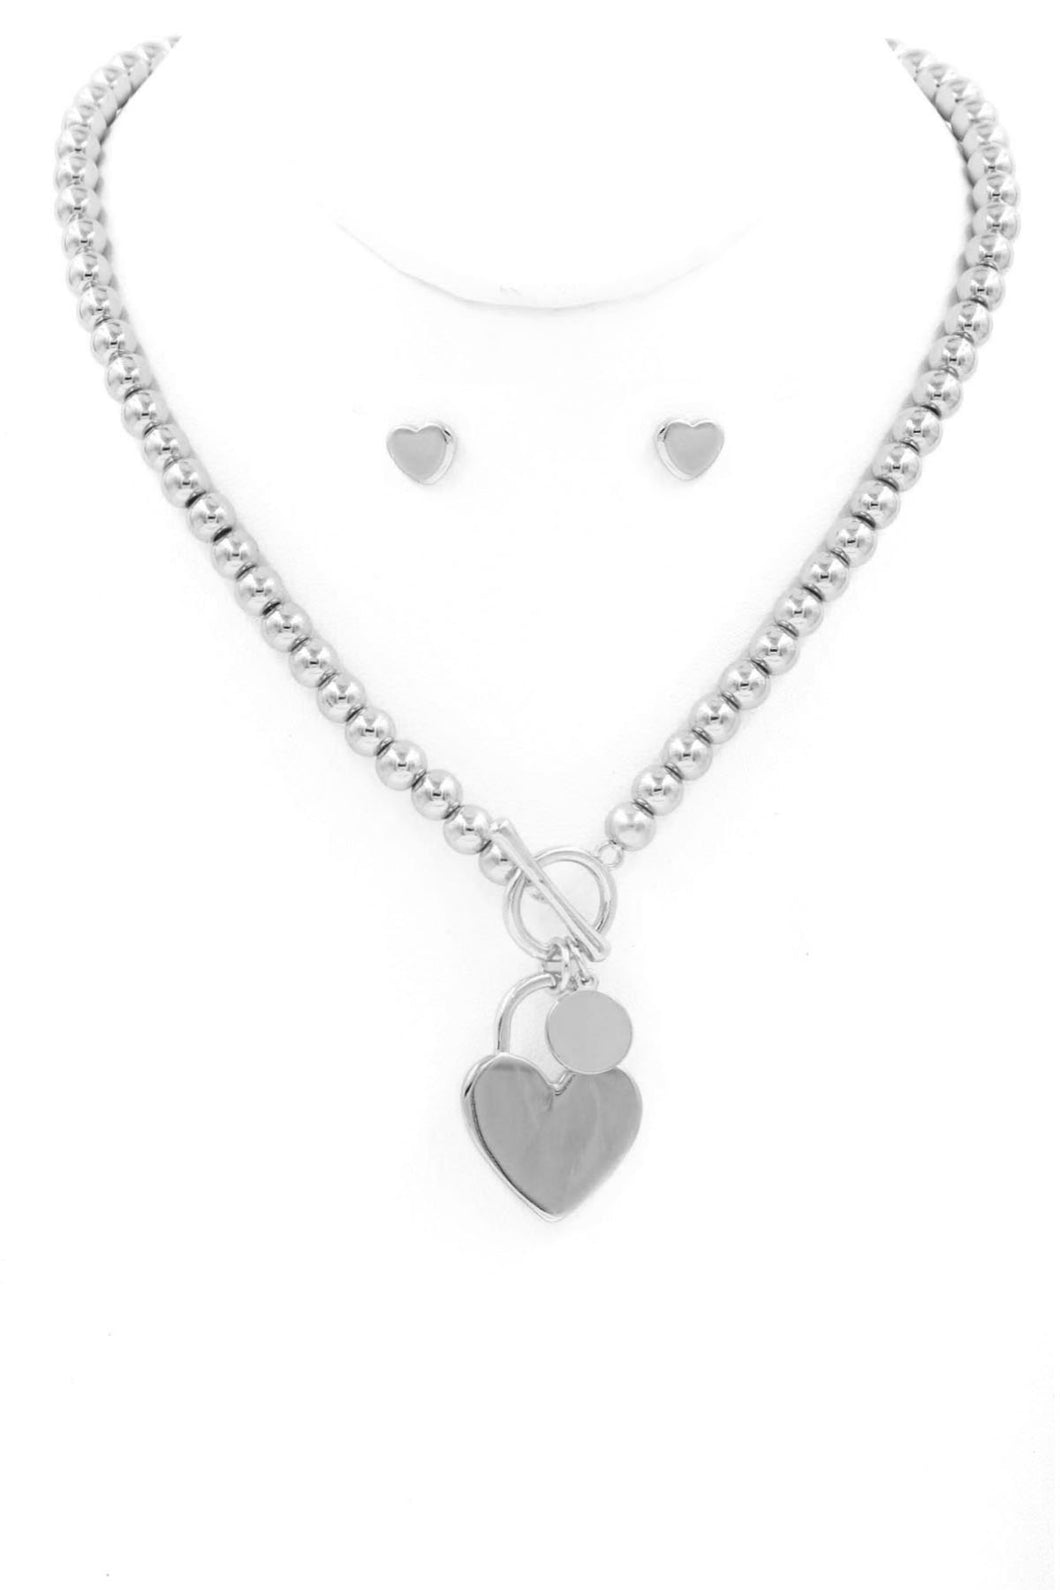 Silver Heart Necklace Set